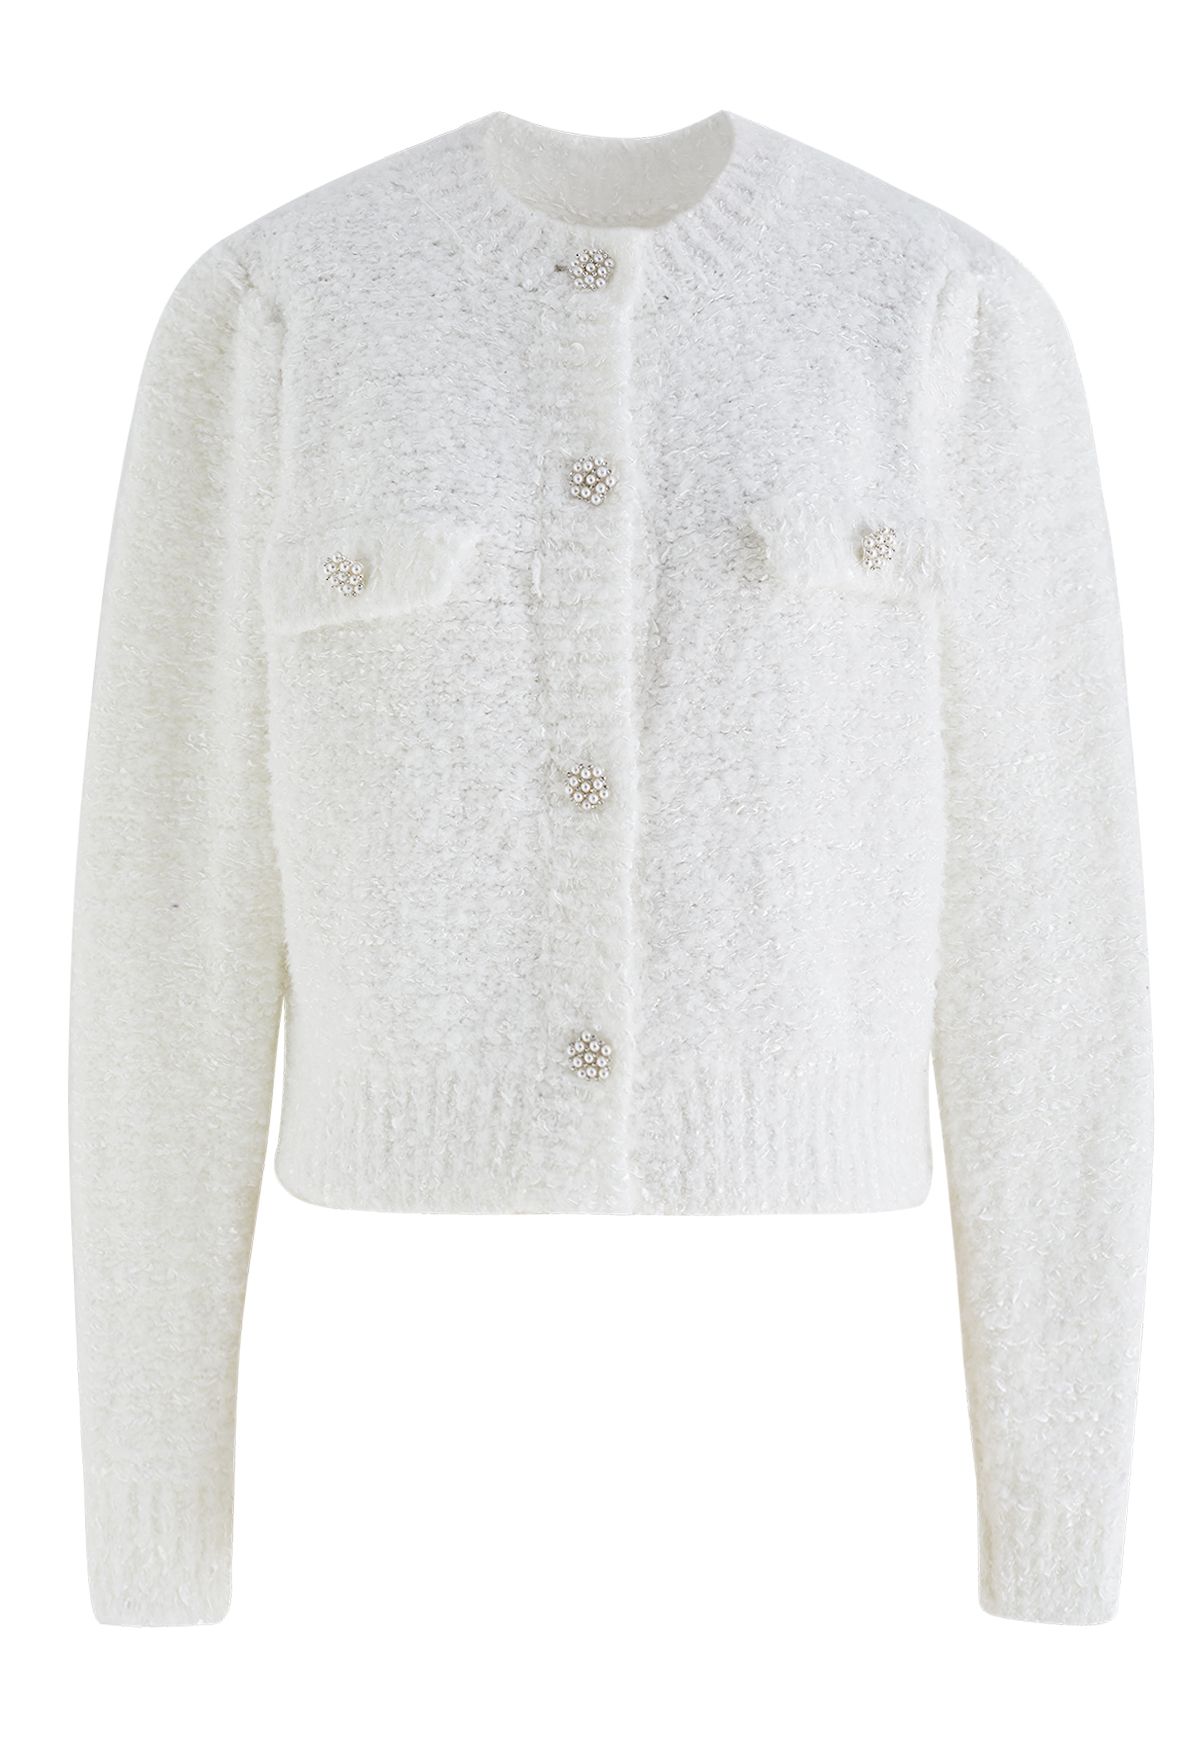 Pearly Button Shimmer Fuzzy Crop Cardigan in White - Retro, Indie and ...